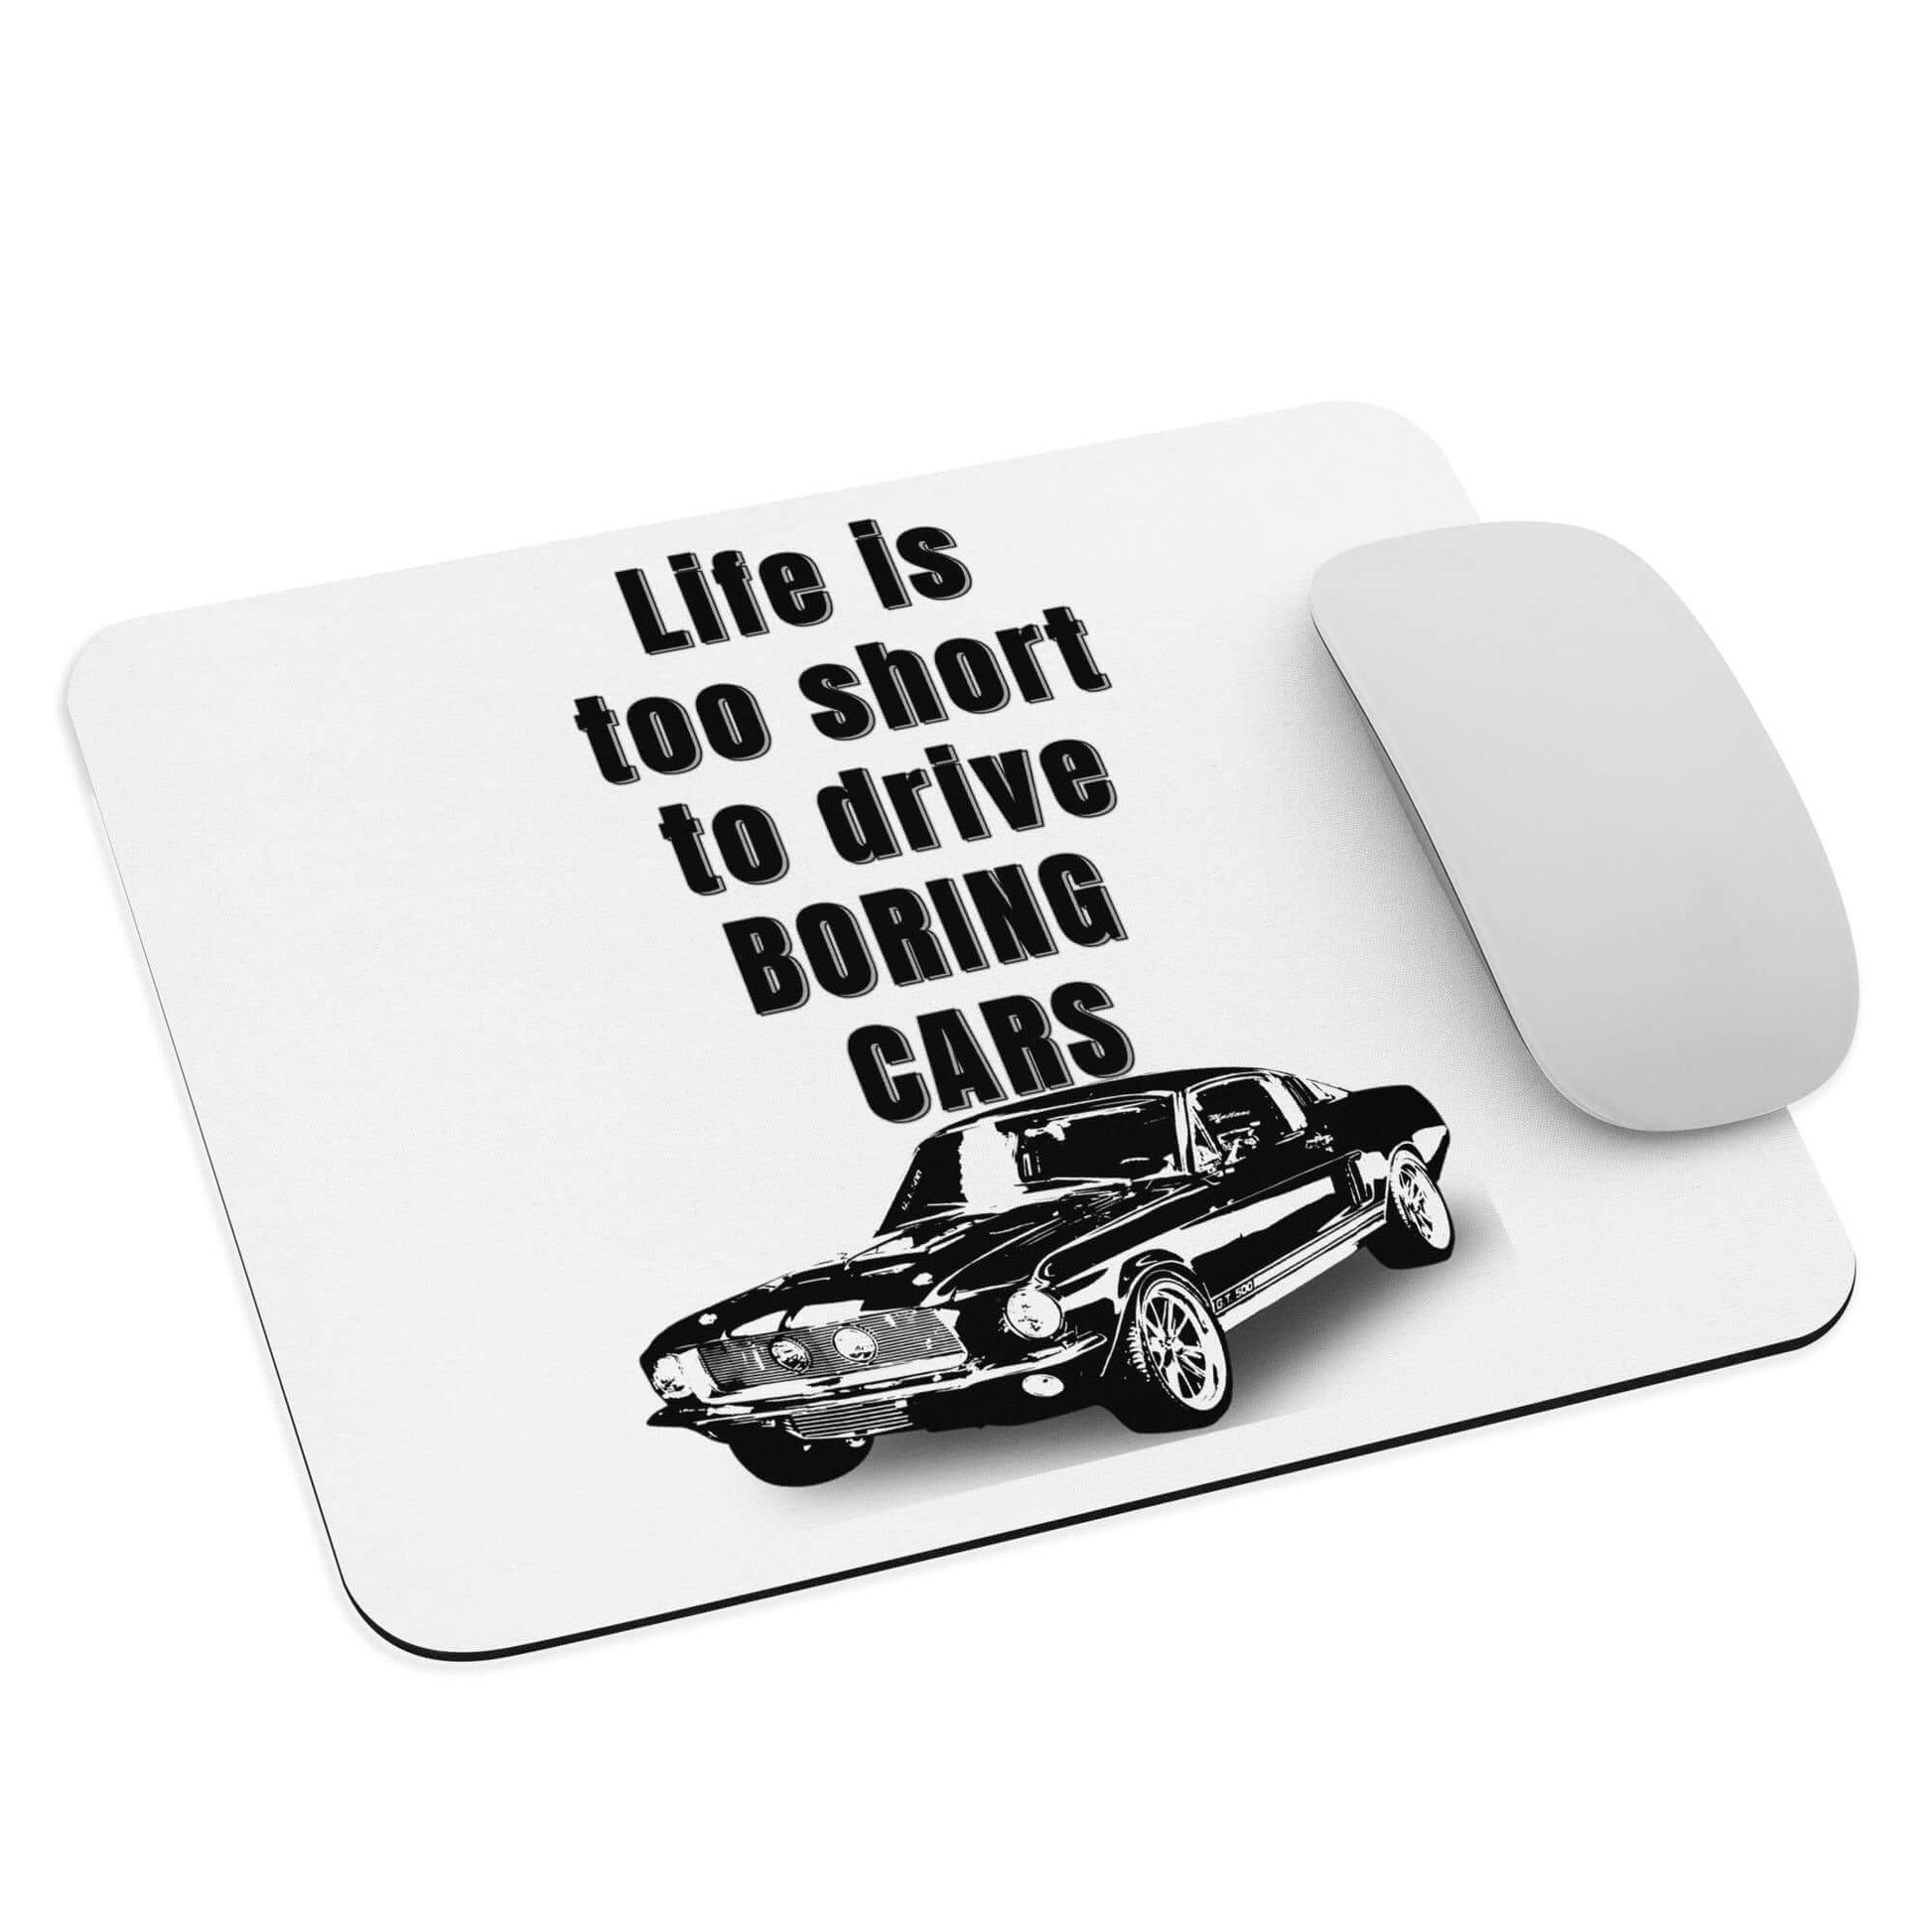 Life is too short to drive BORING cars - 1967-Ford-Shelby GT 500 - Mouse pad - Horrible Designs